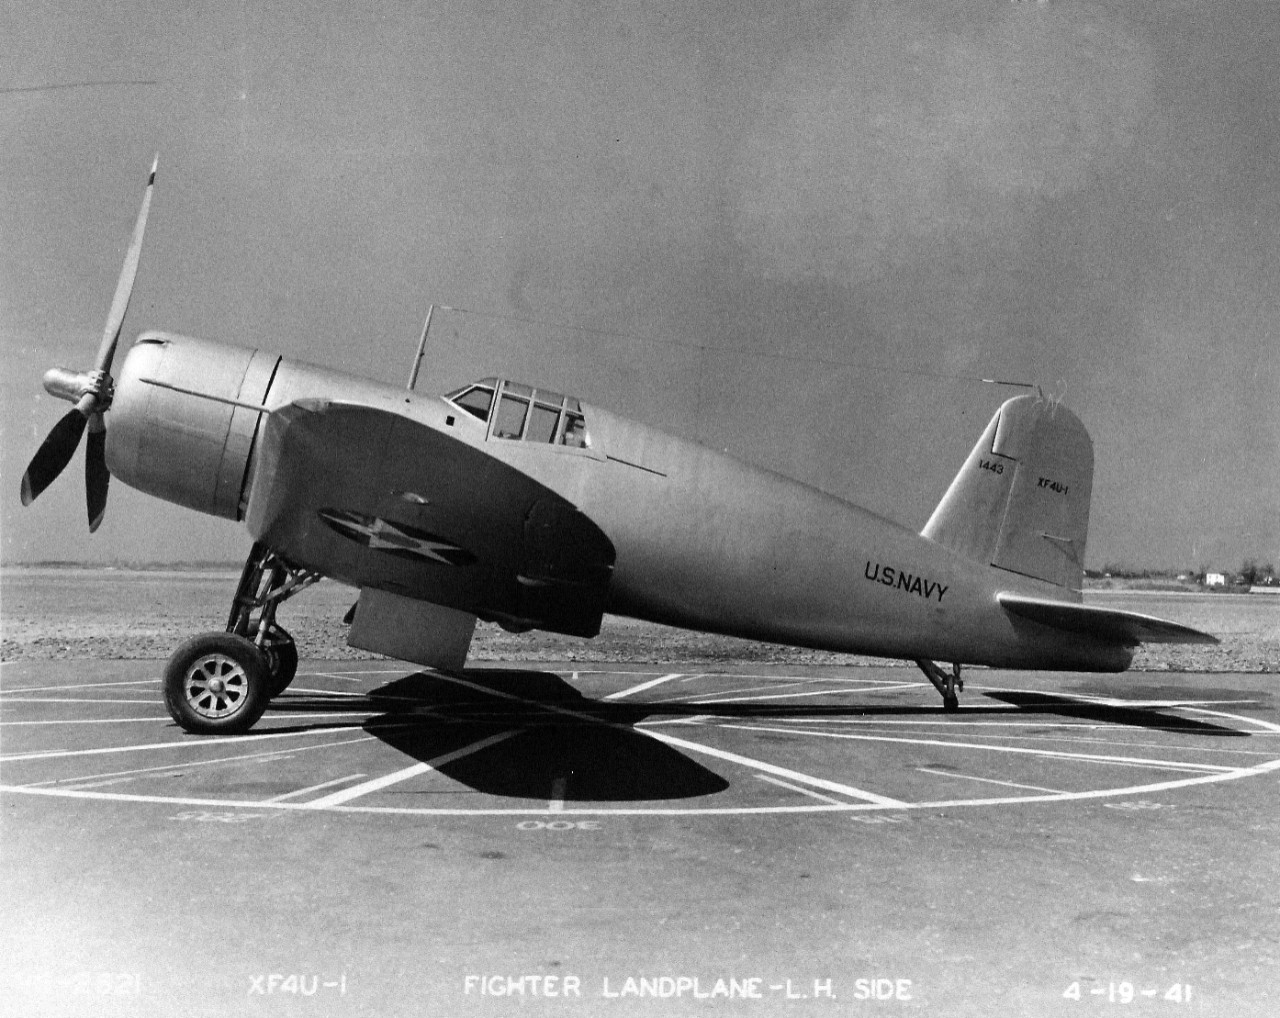 80-G-65001:   Vought XF4U-1 aircraft, April 1940.  This aircraft was the prototype for the Corsair.  photographed on April 19, 1940.   Official U.S. Navy Photograph, now in the collections of the National Archives.  